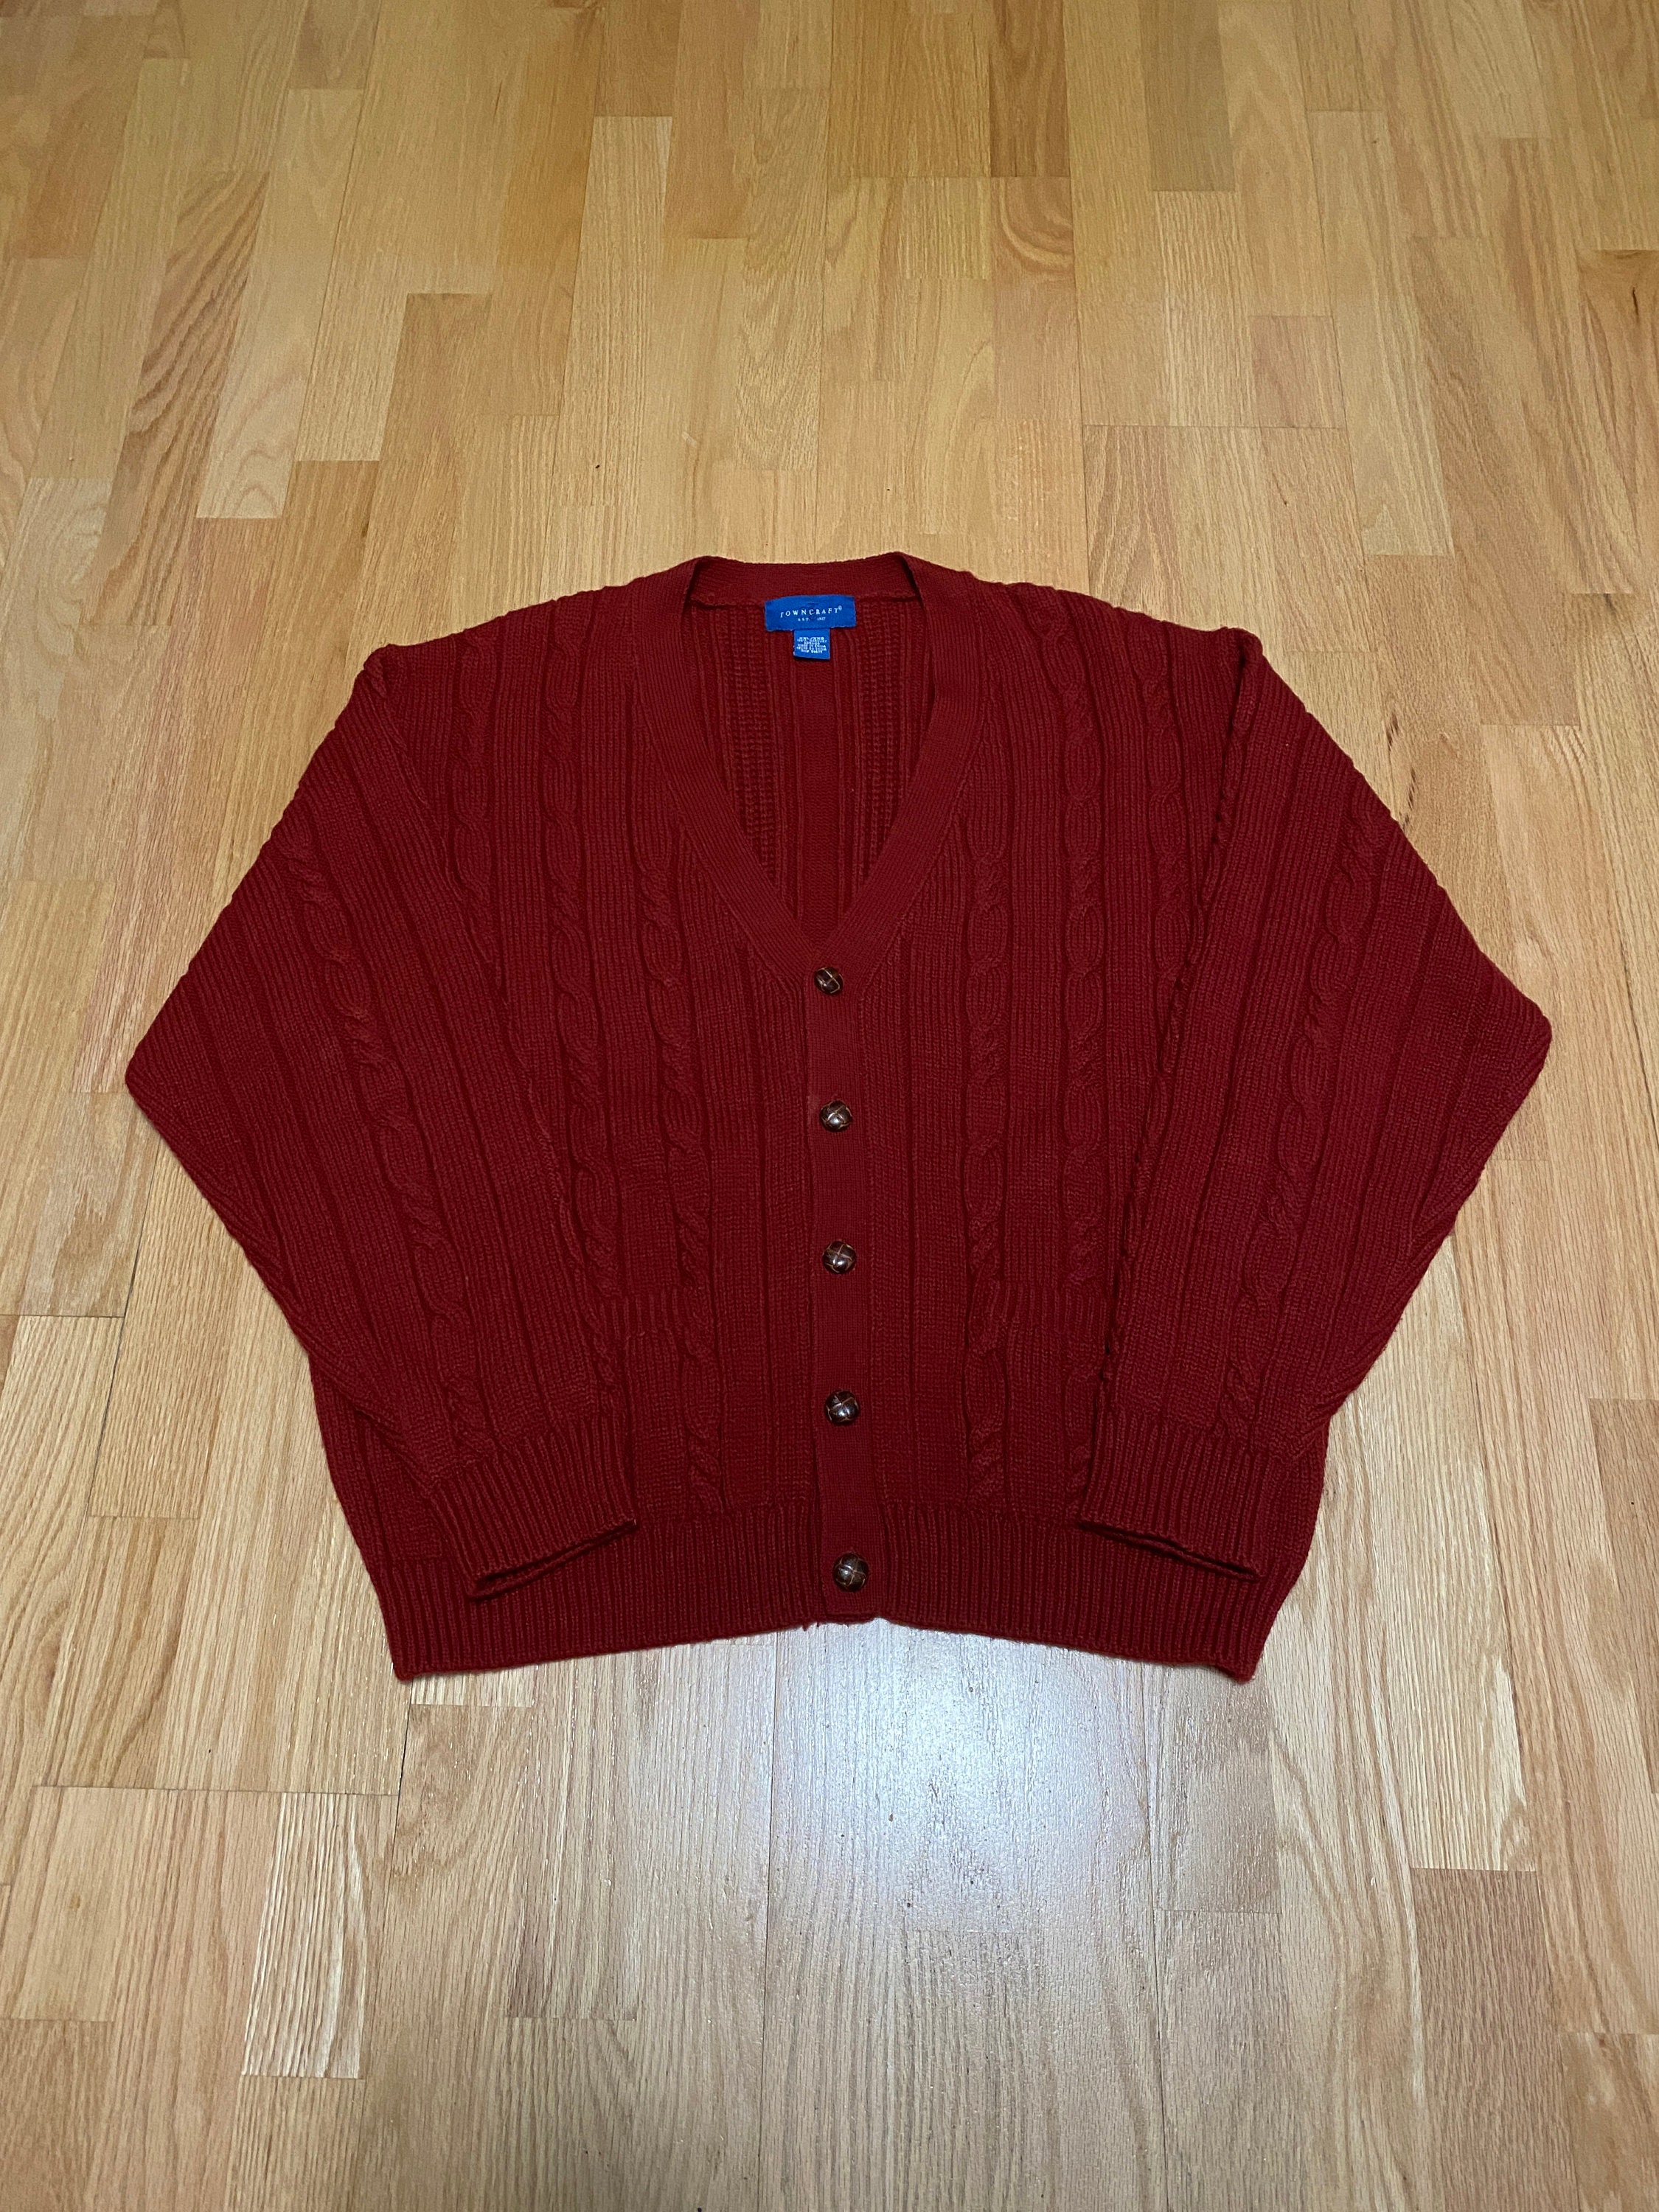 VINTAGE 80s TOWNCRAFT CABLE KNIT